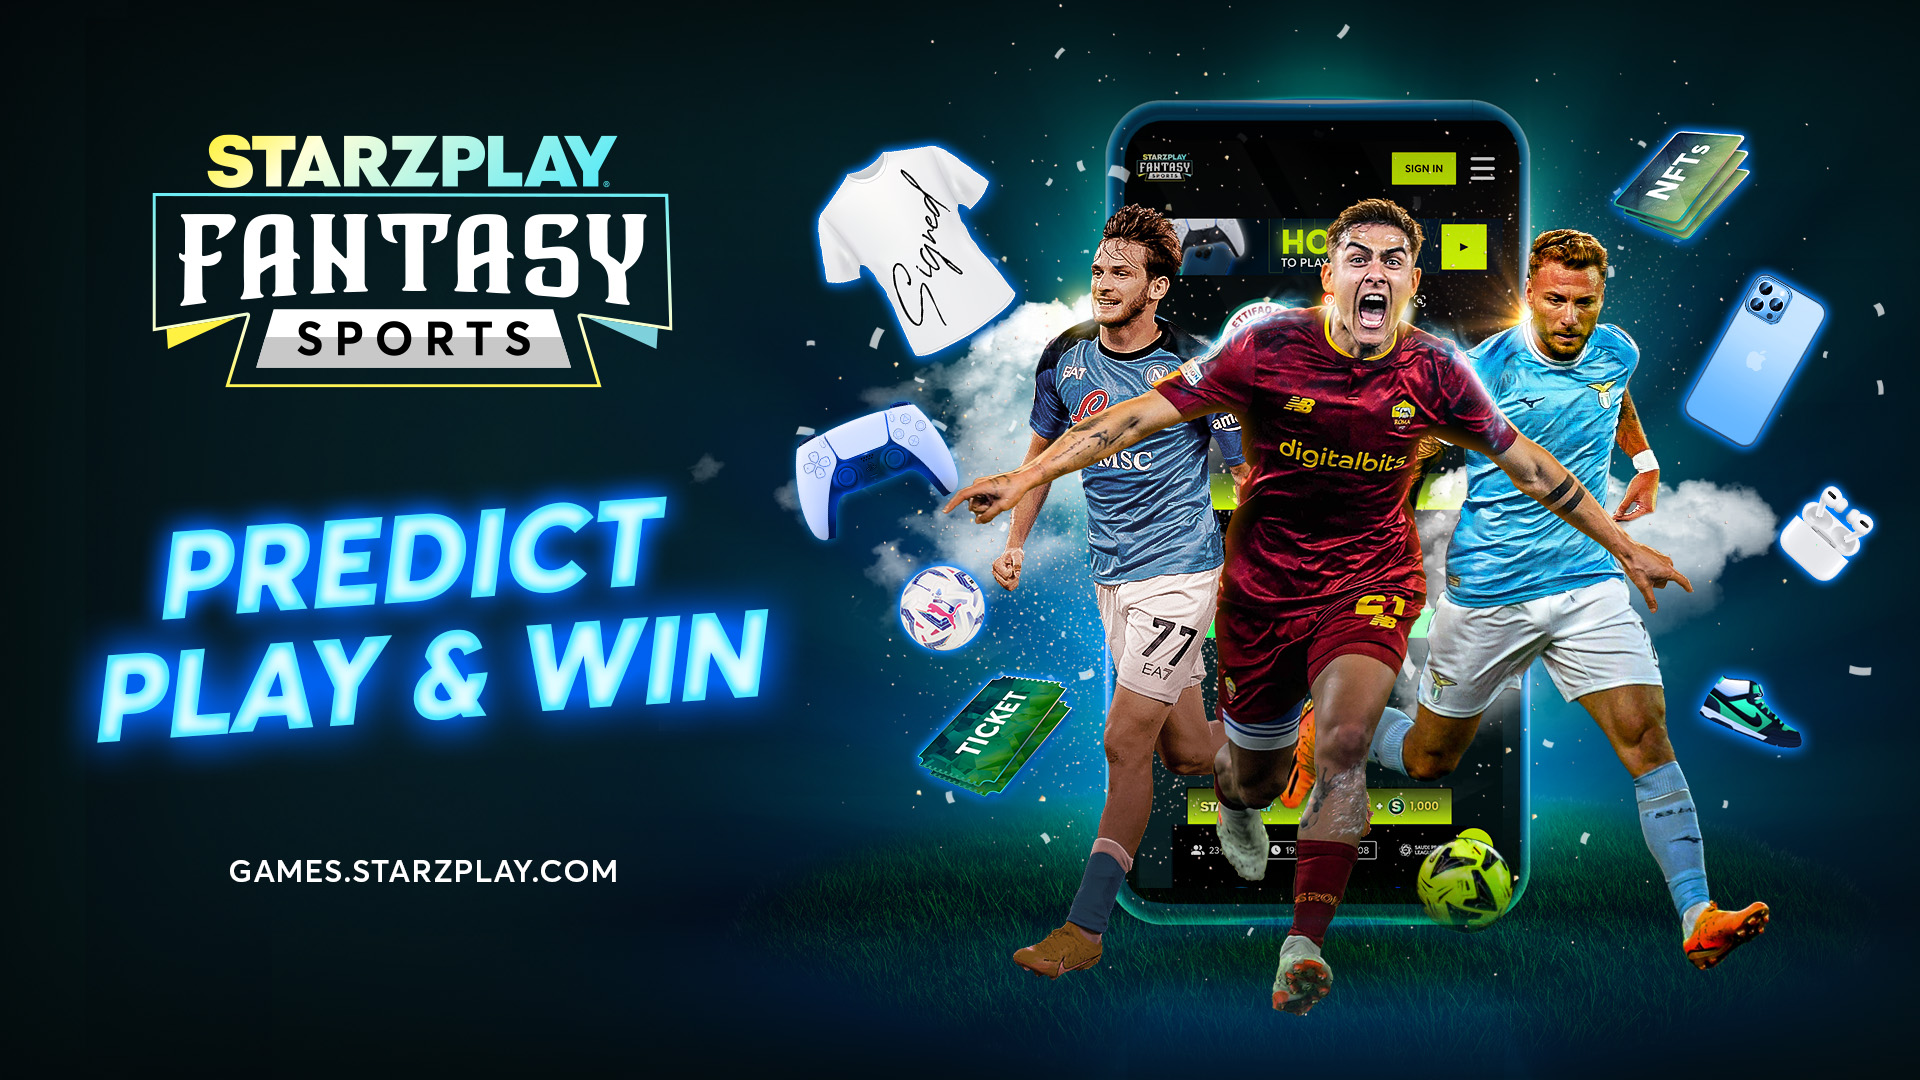 Starzplay to expand football content with Starzplay Fantasy Sports game